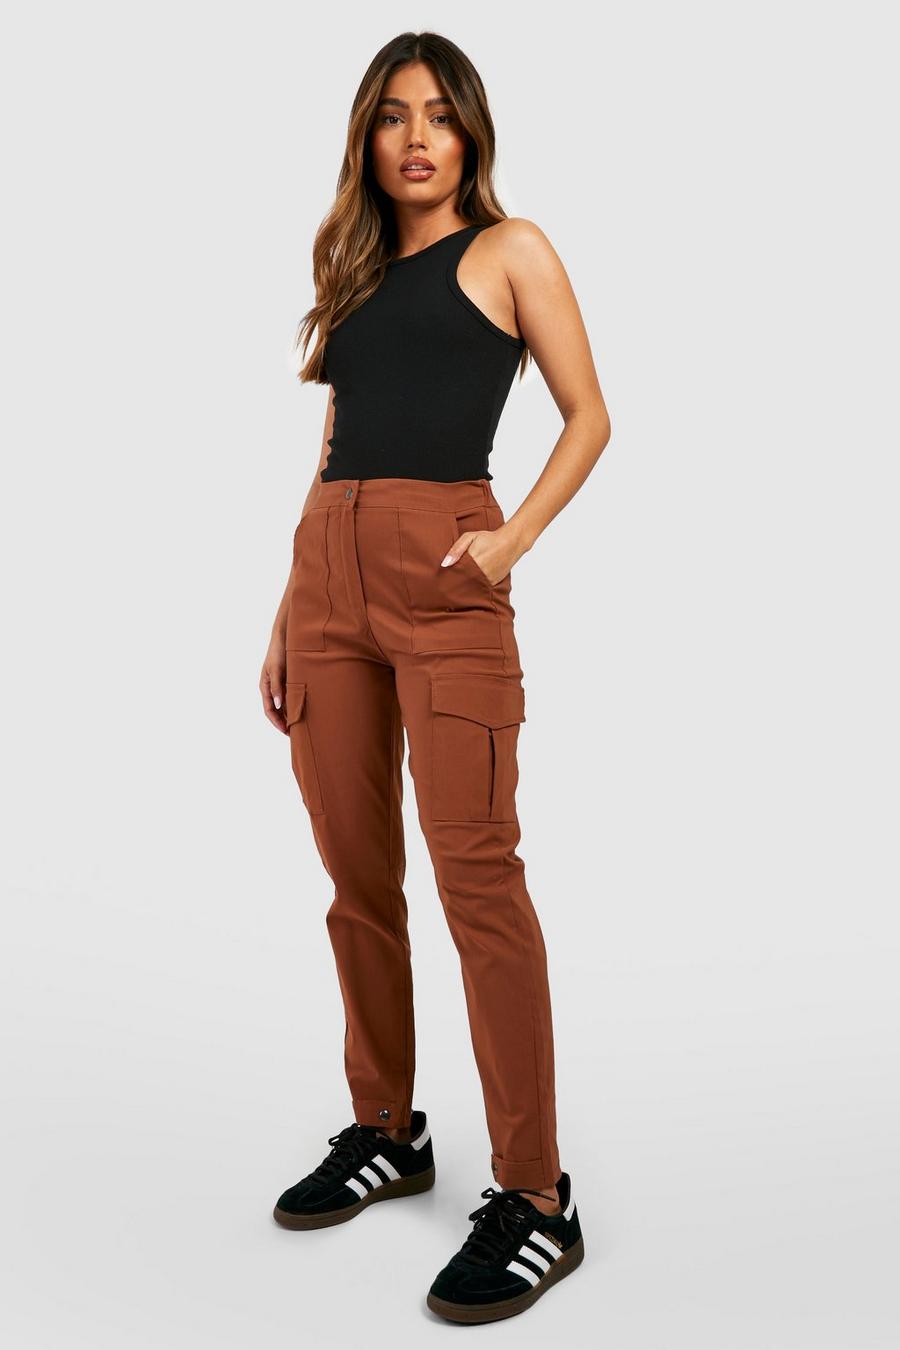 Women's Stretch Woven Pocket Cargo Casual Trousers